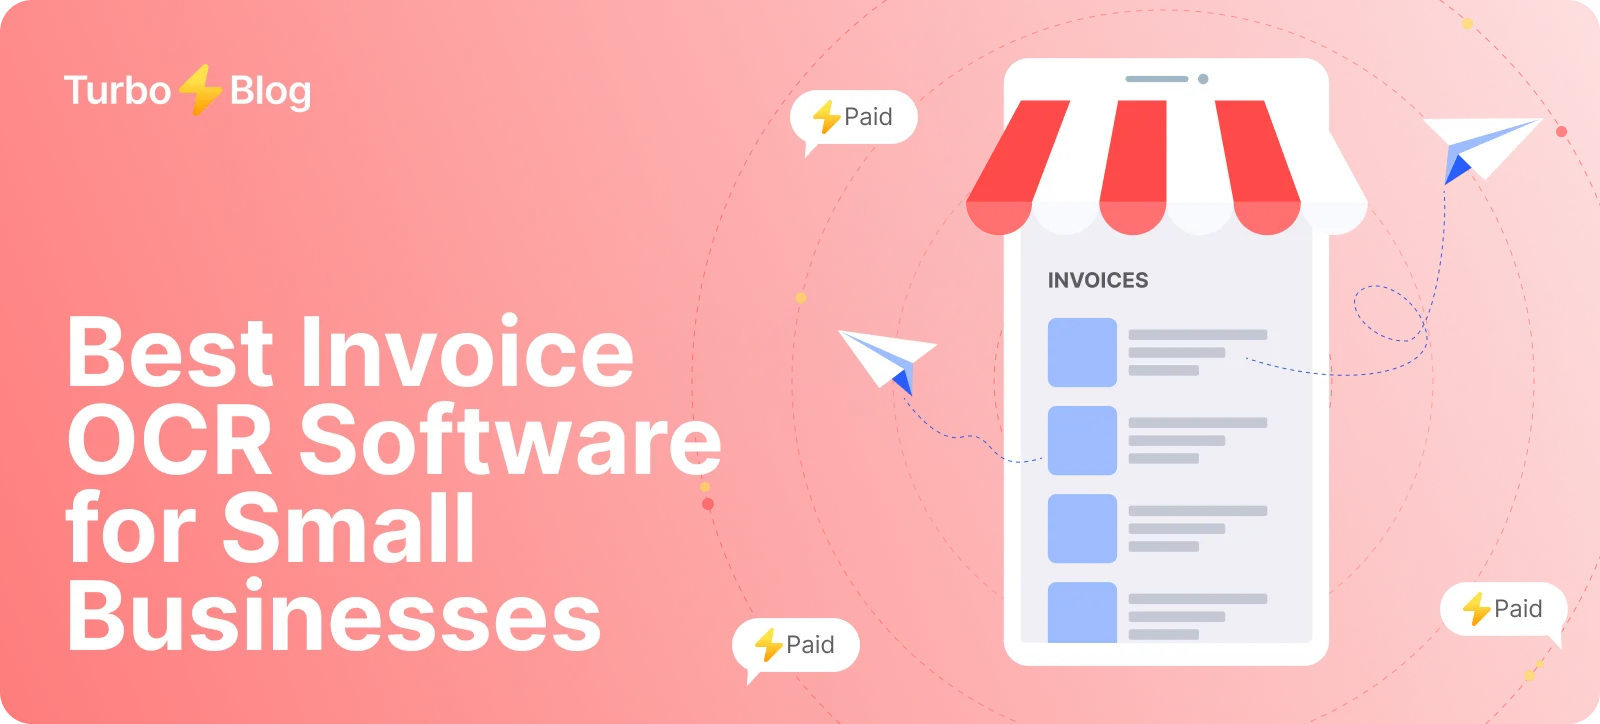 5 Best Invoice OCR Software for small businesses